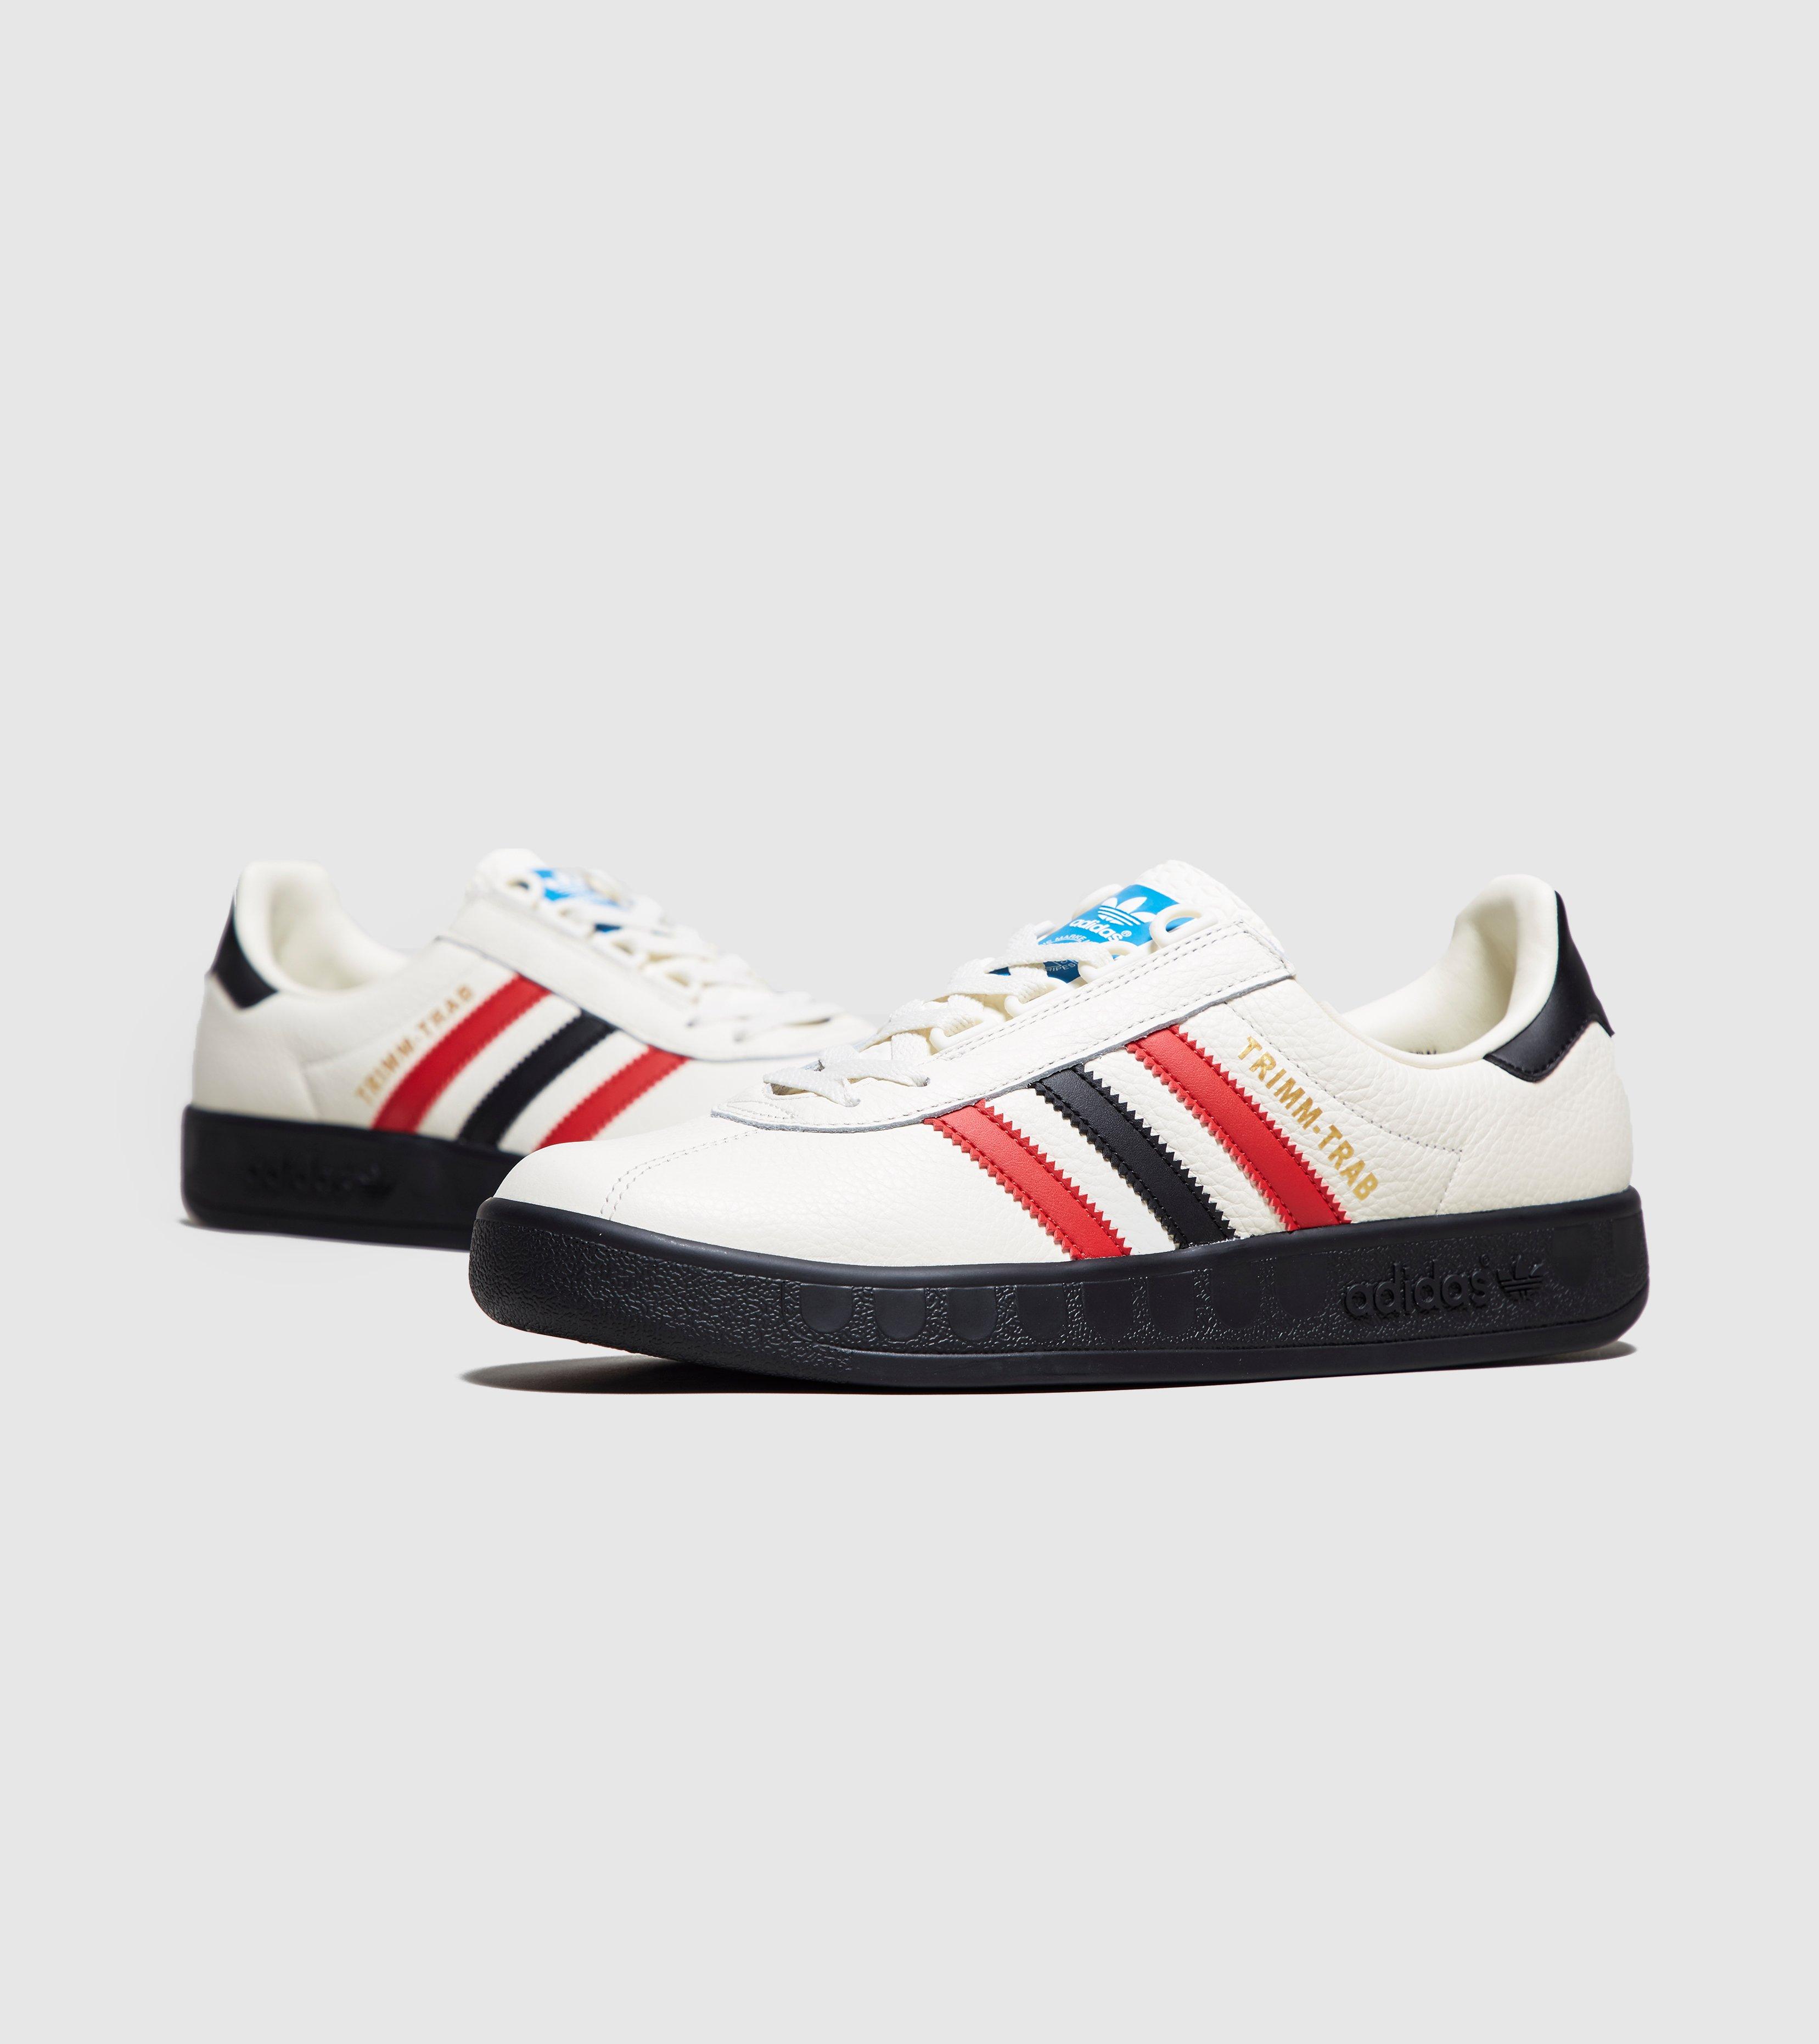 adidas trimm trab size exclusive